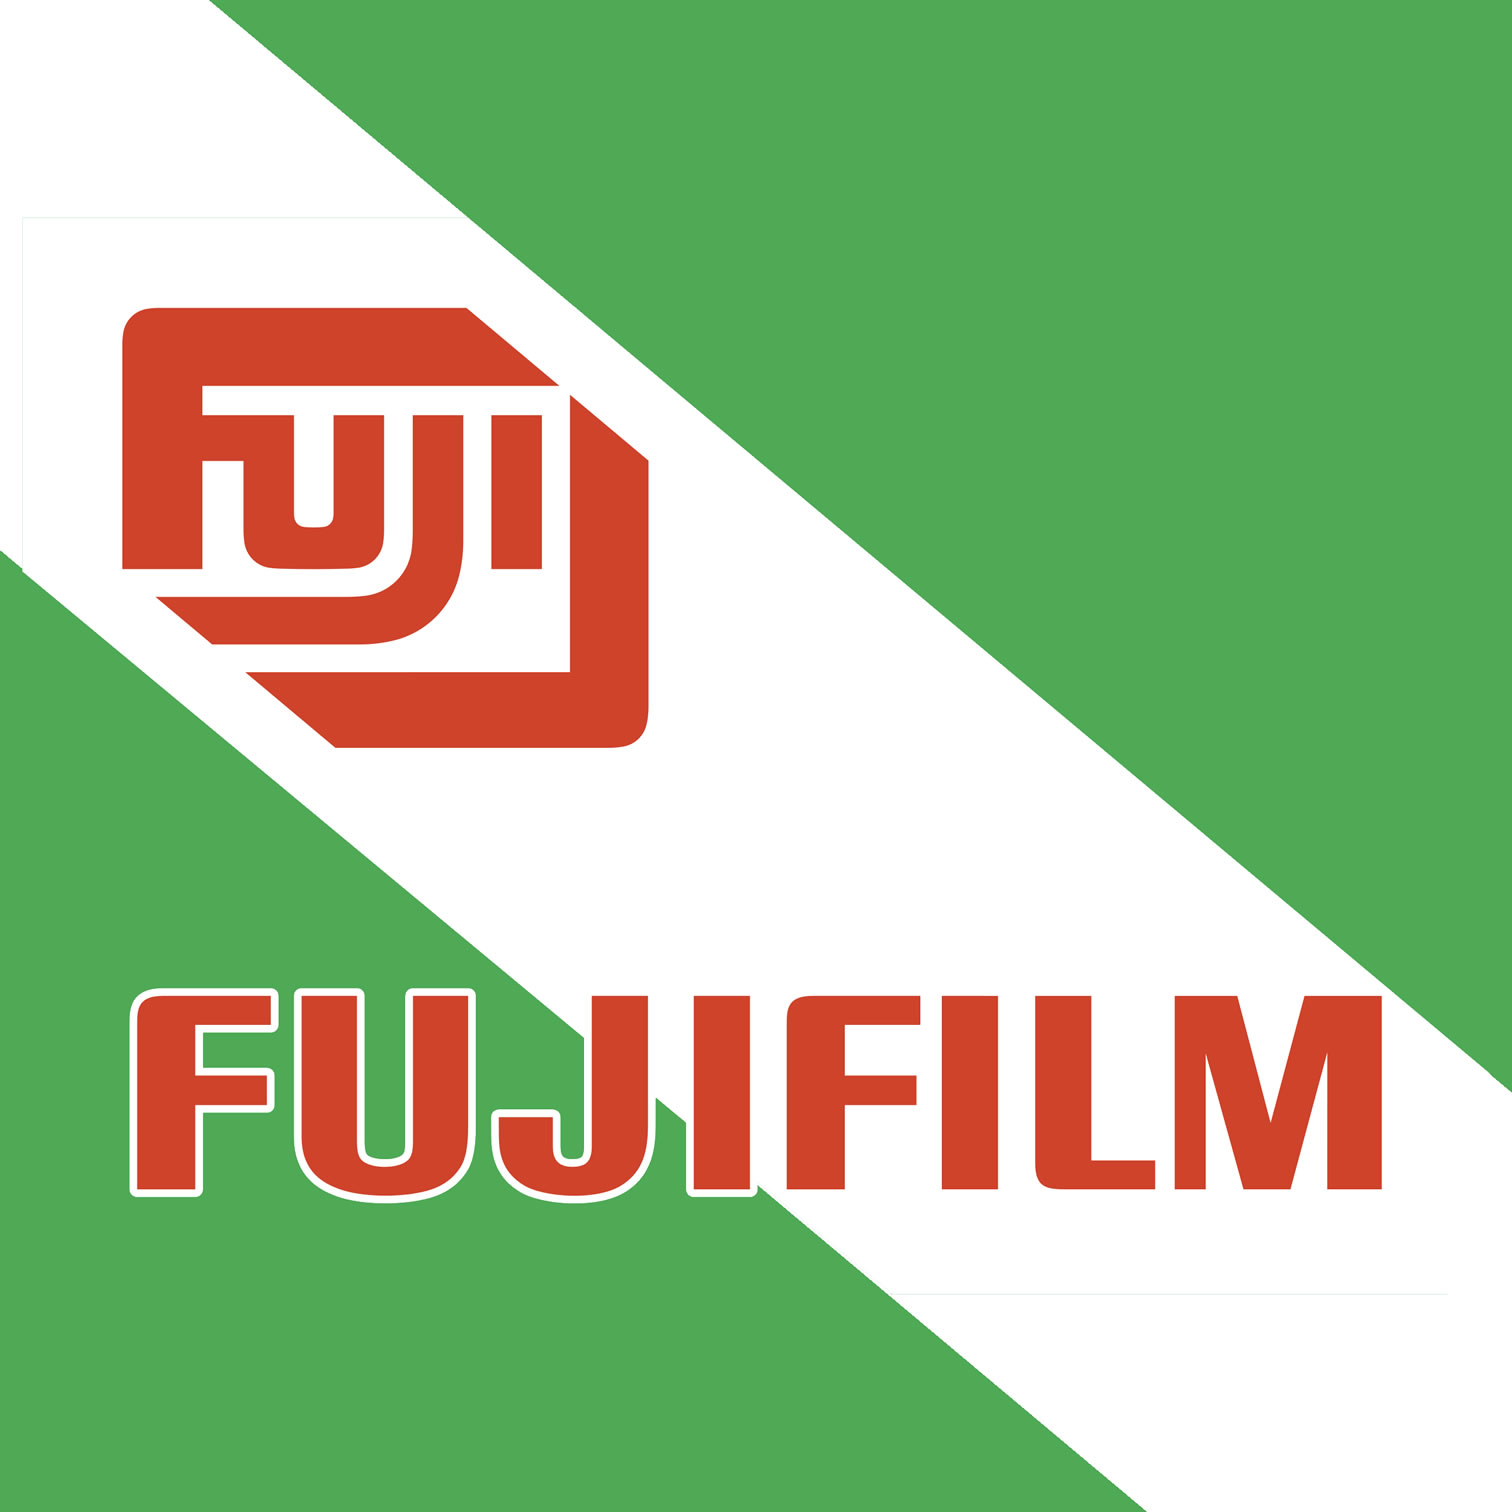 No joke: 30%+ price increase on Fujifilm photographic film and paper from April 1st 2019